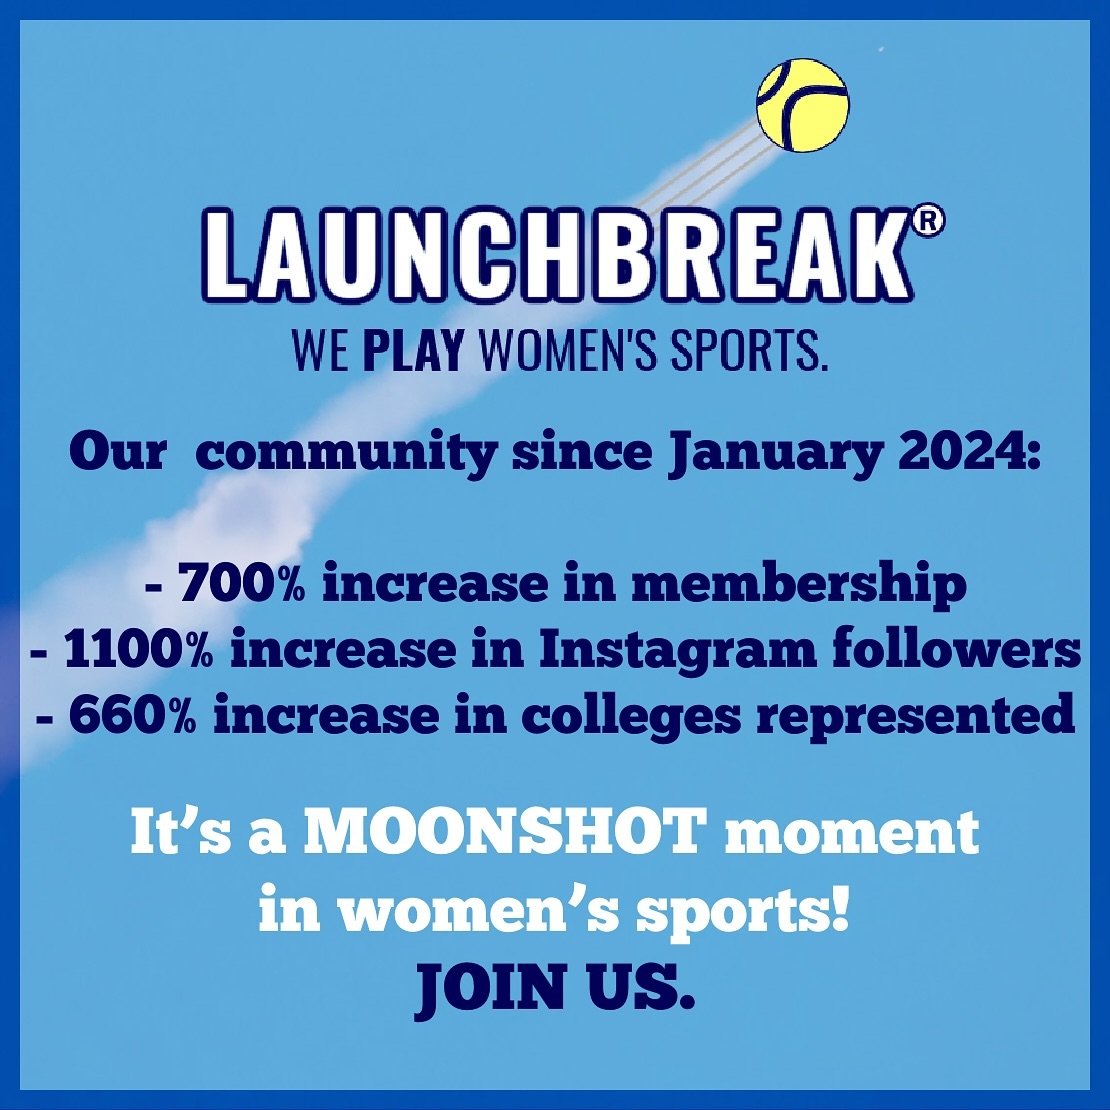 LaunchBreak is a professional and shared-interest networking community for athletes that play/ed women&rsquo;s sports at the collegiate, national or pro level. Join our inclusive community for free today. Link in bio.

#LaunchBreak
#womeninsport 
#wo